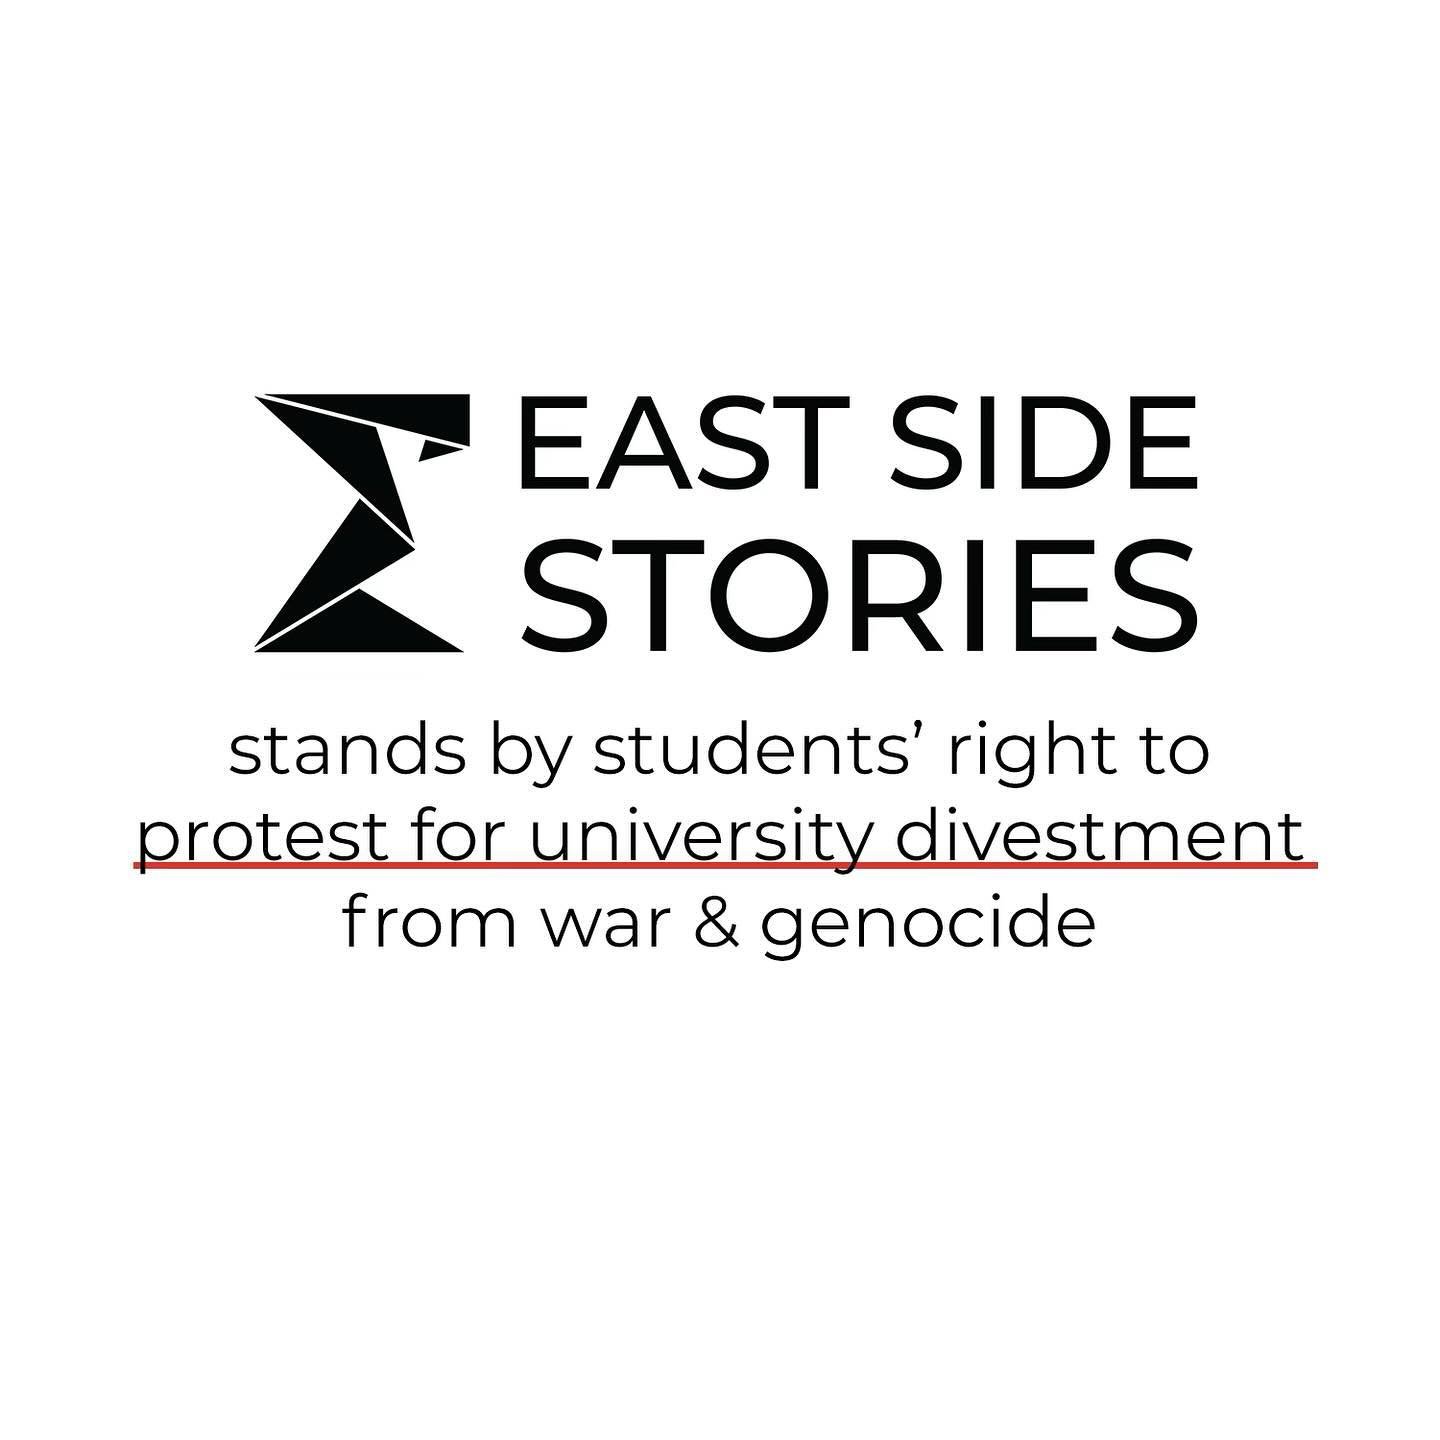 East Side Stories stands in solidarity with student &amp; faculty protestors, and call for peace &amp; justice for Palestine.